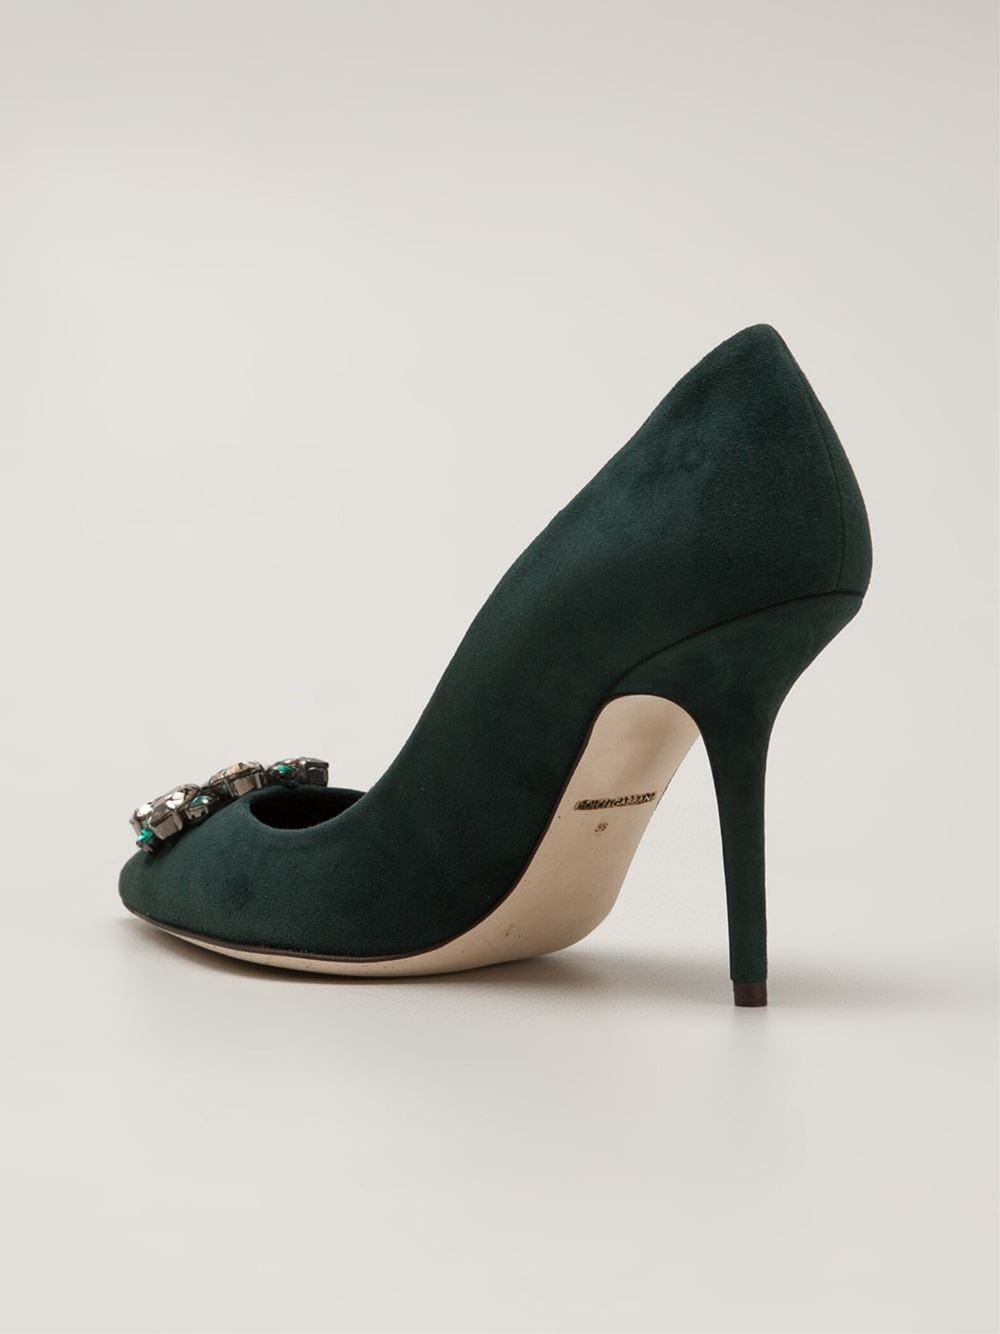 DOLCE & GABBANA-Suede Pump With Crystal Toe-